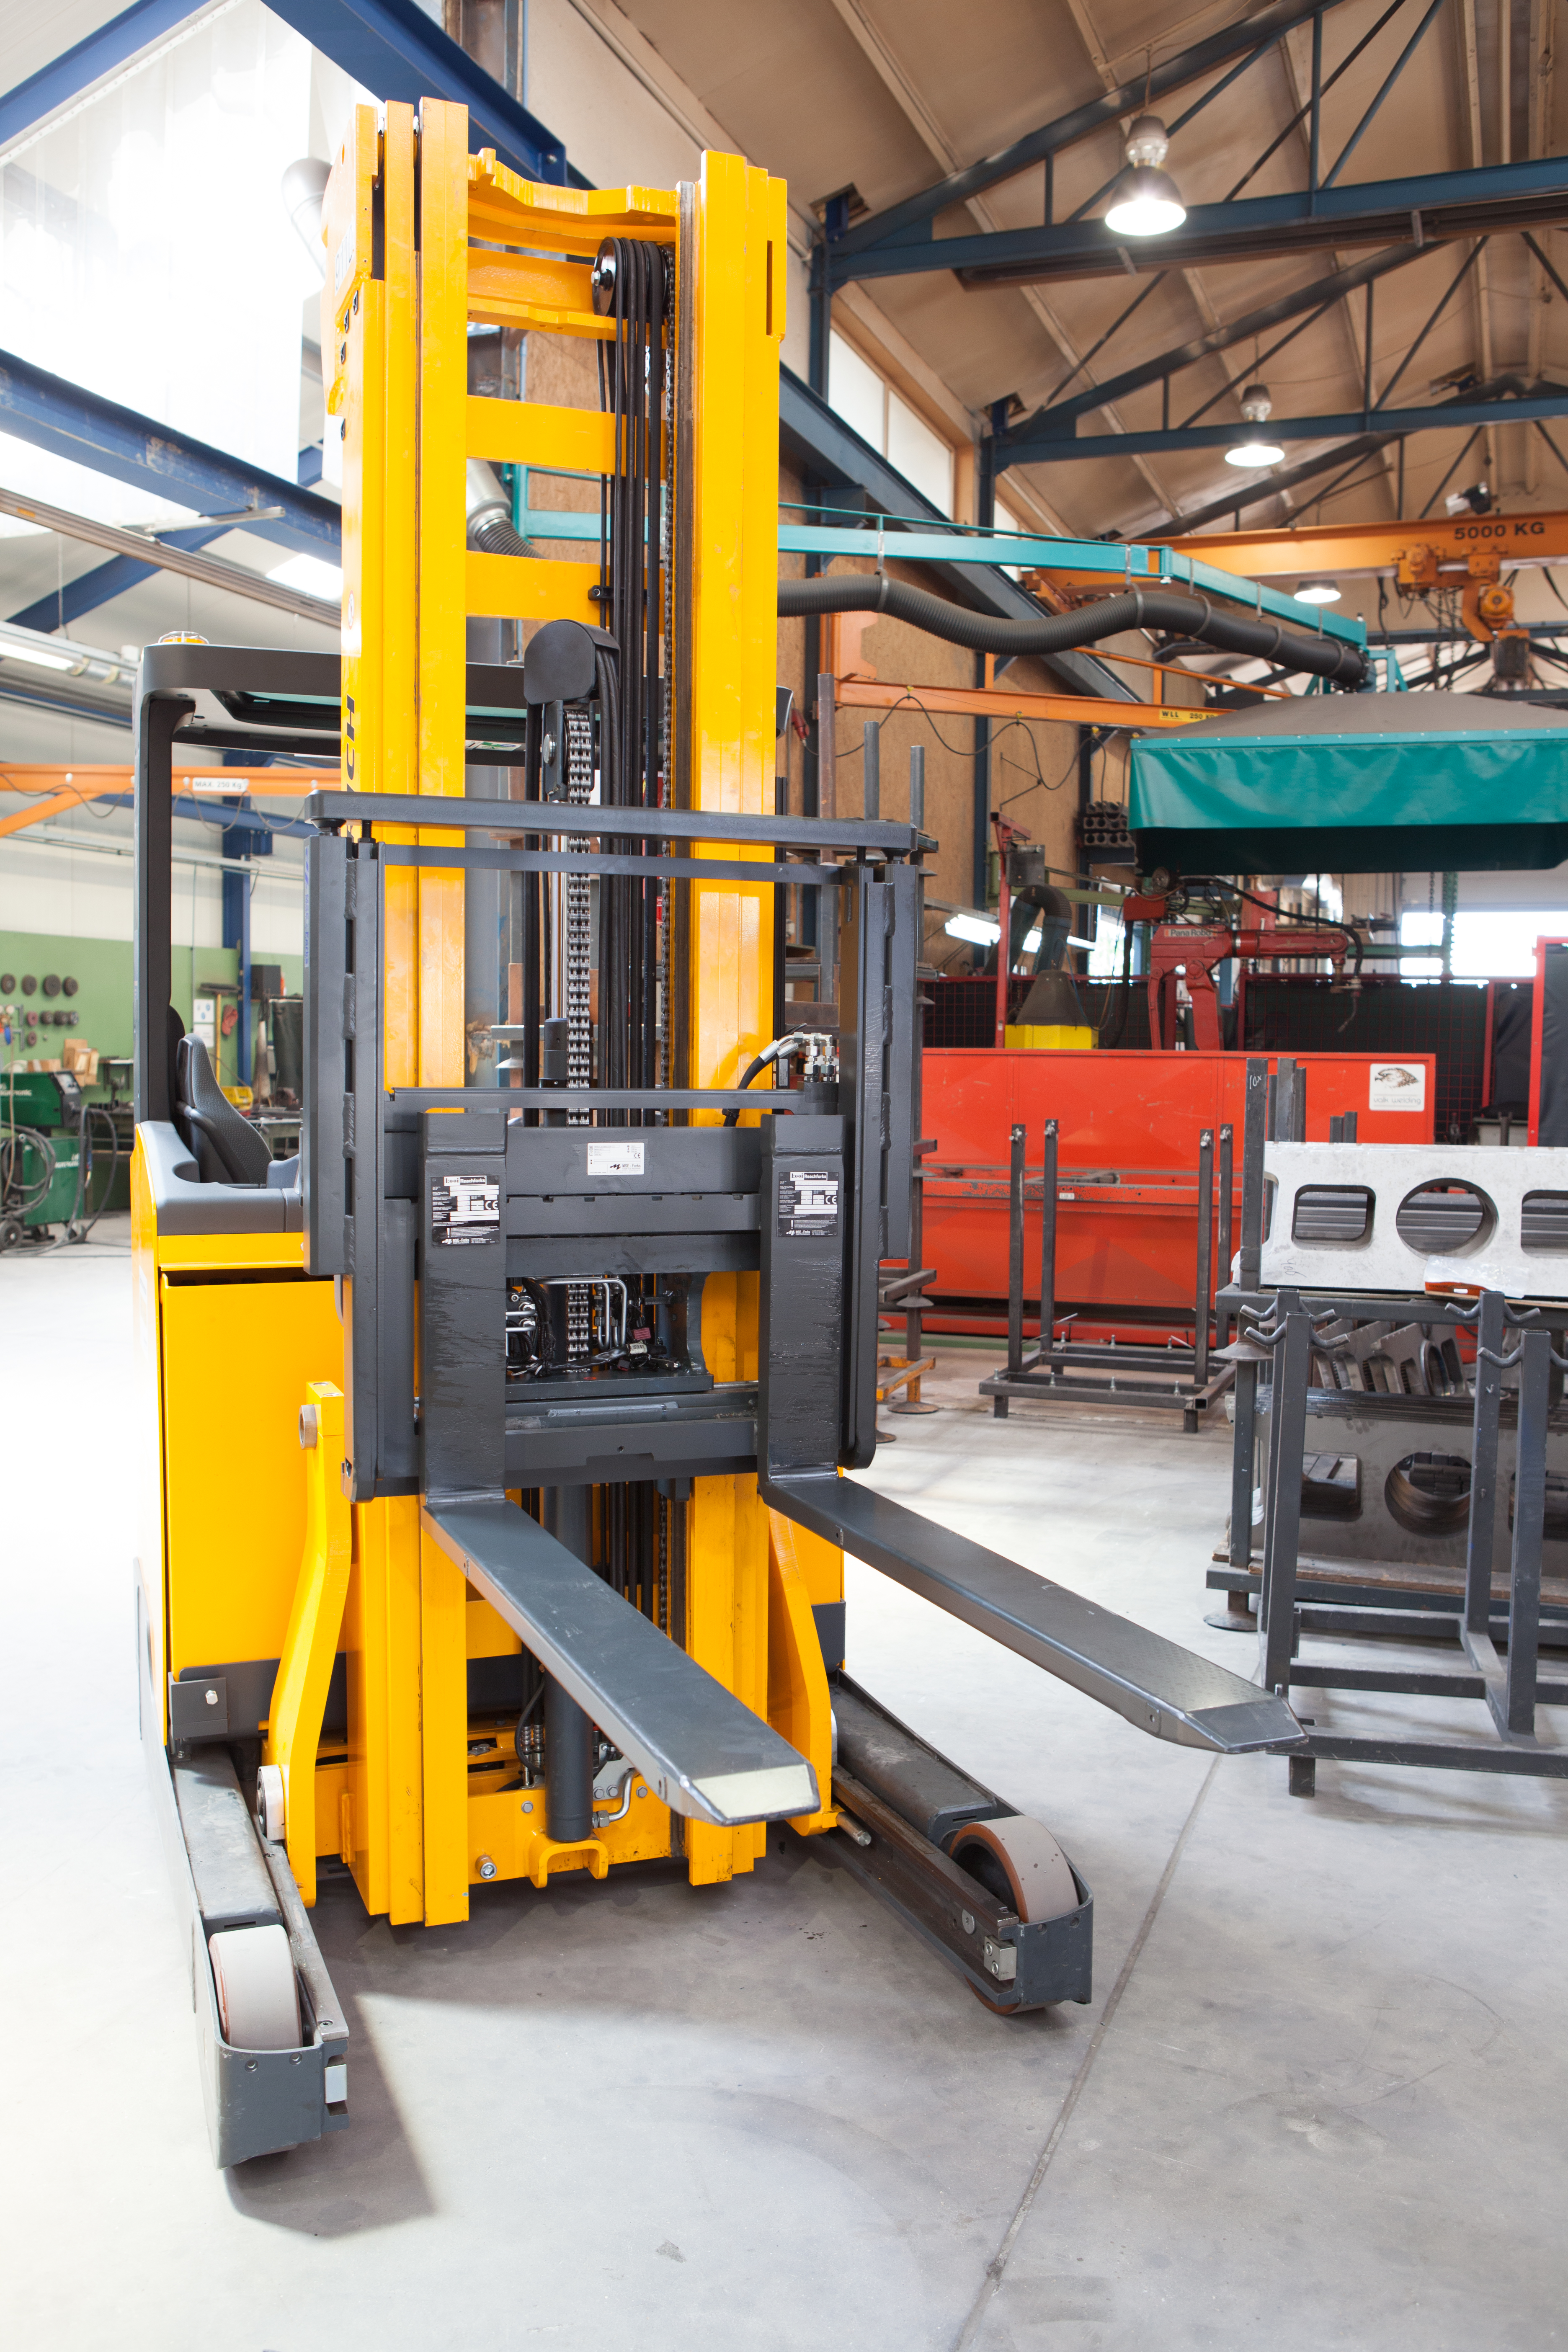 The KOOI Mast Height Extension, add-on mast, is designed to increase the lifting height of an existing forklift mast.